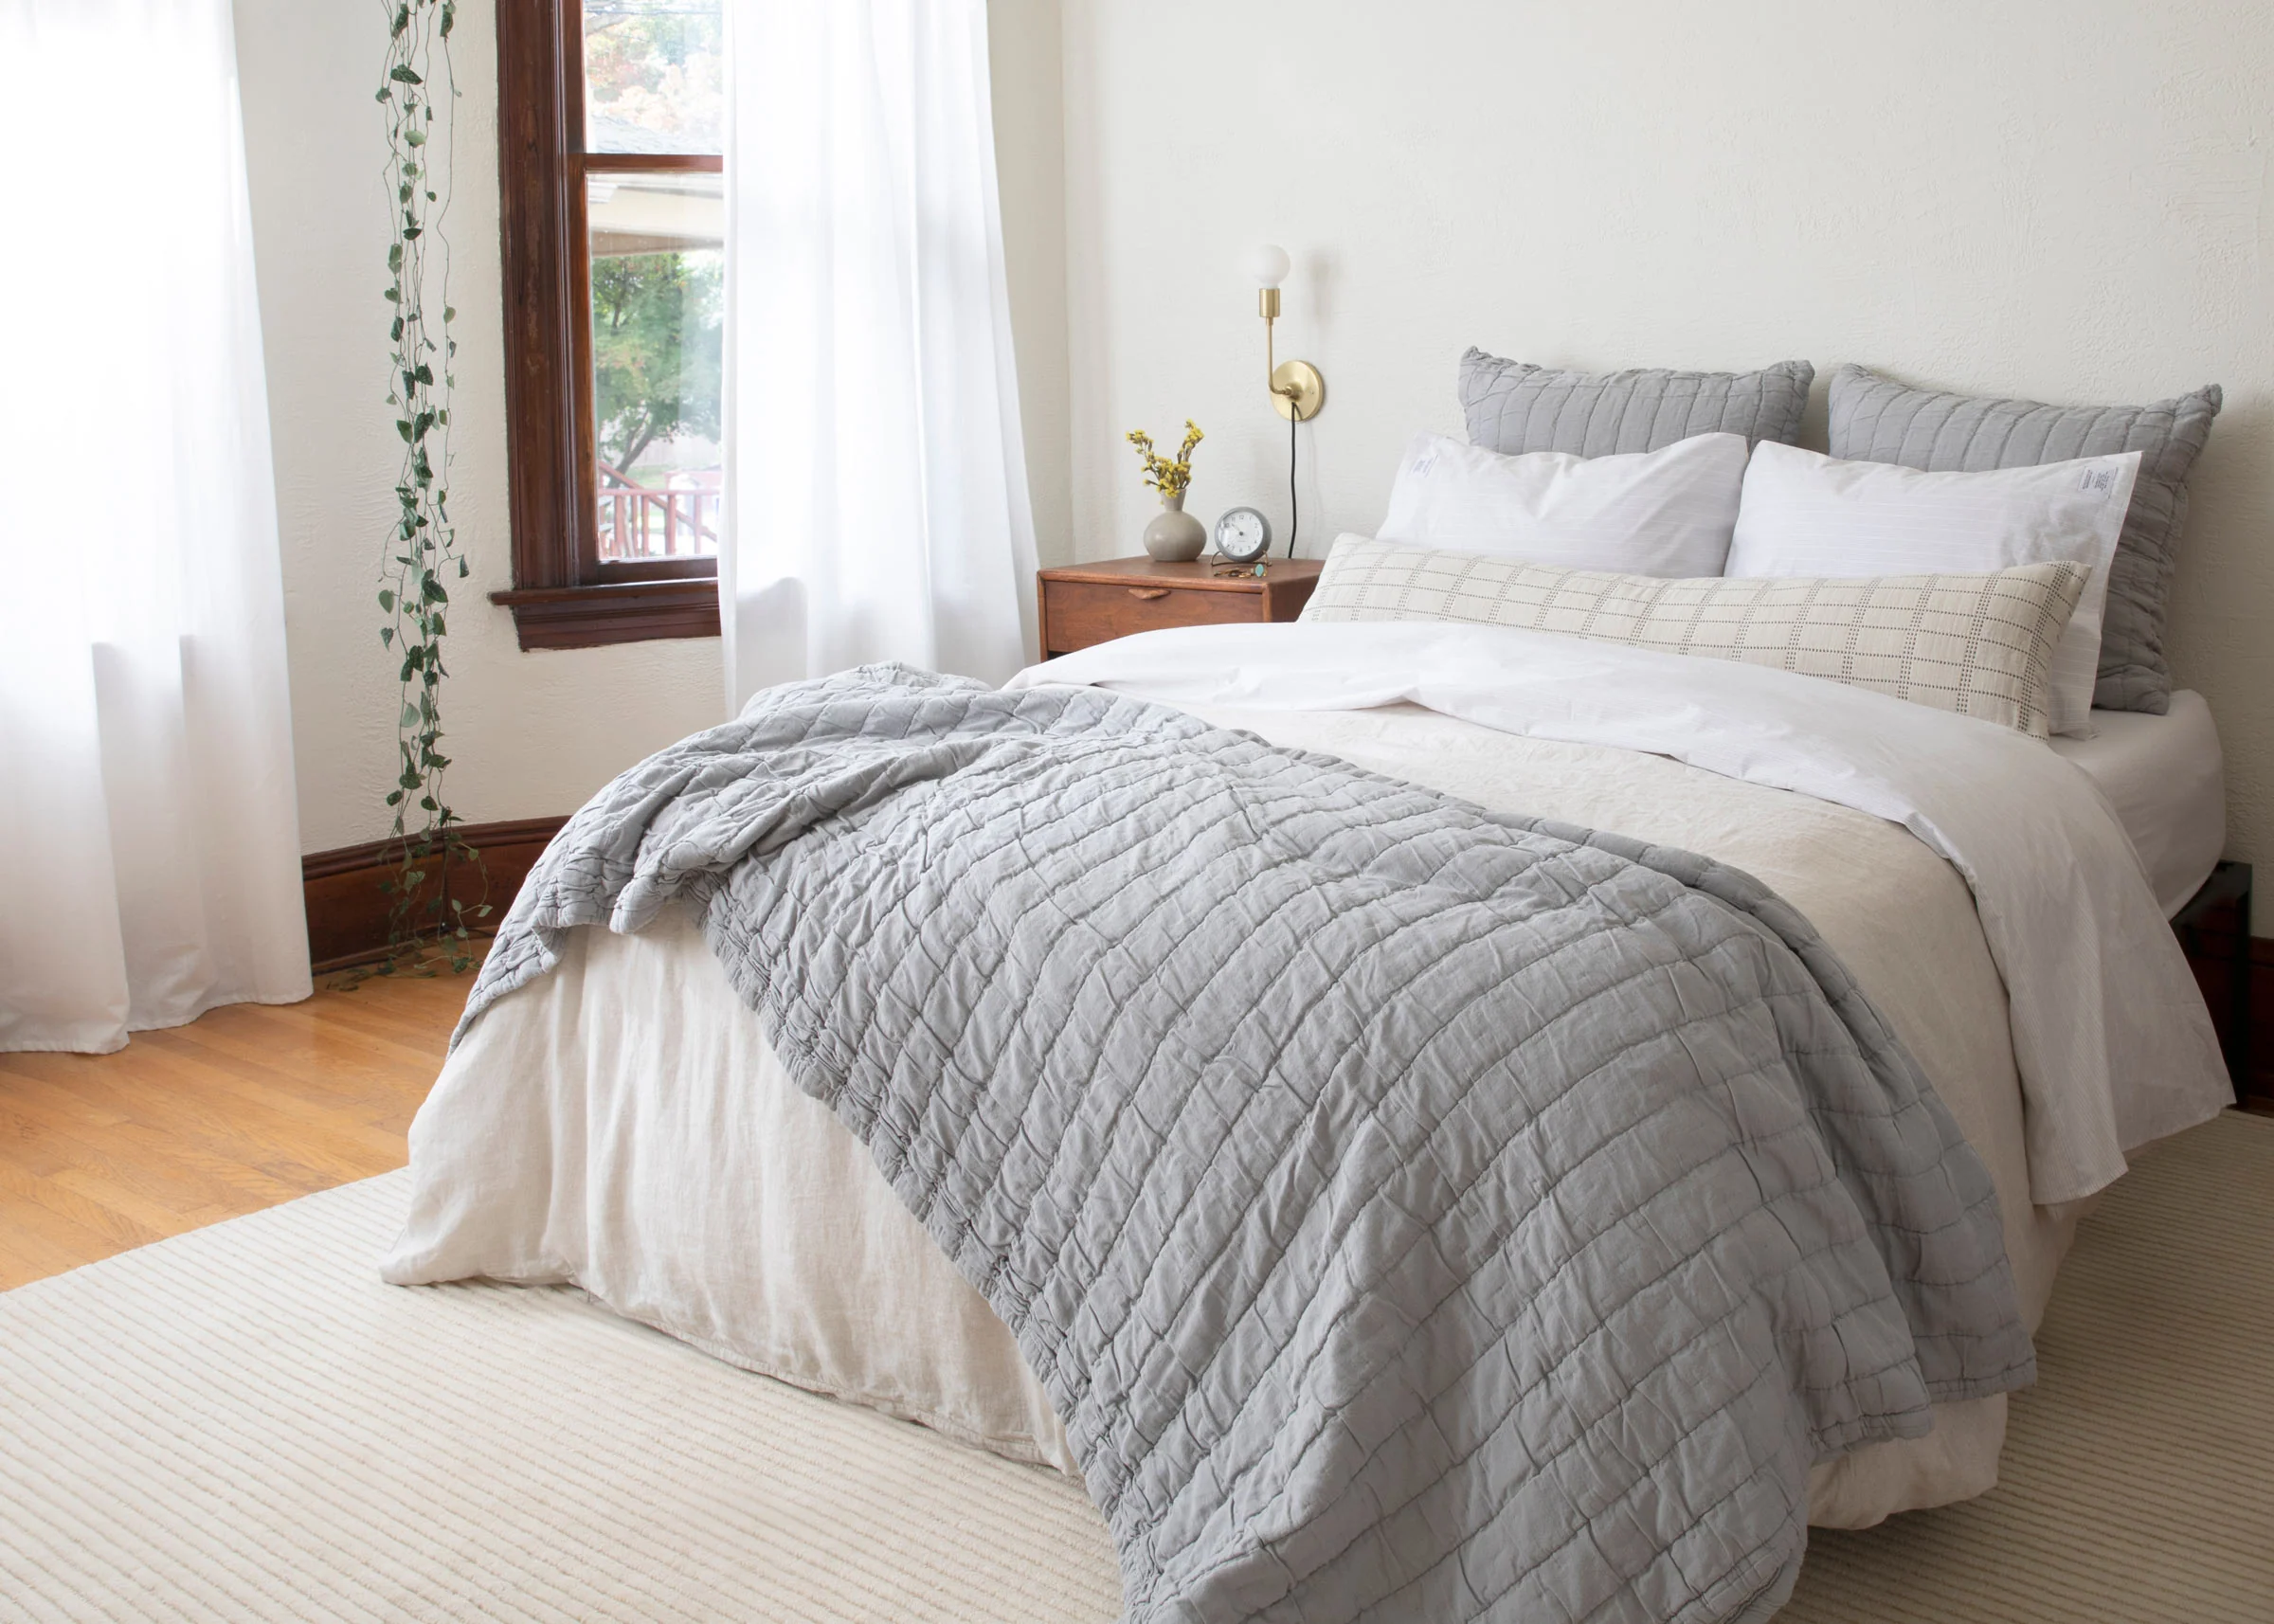 Tips For Creating a Comfortable and Cozy Bed